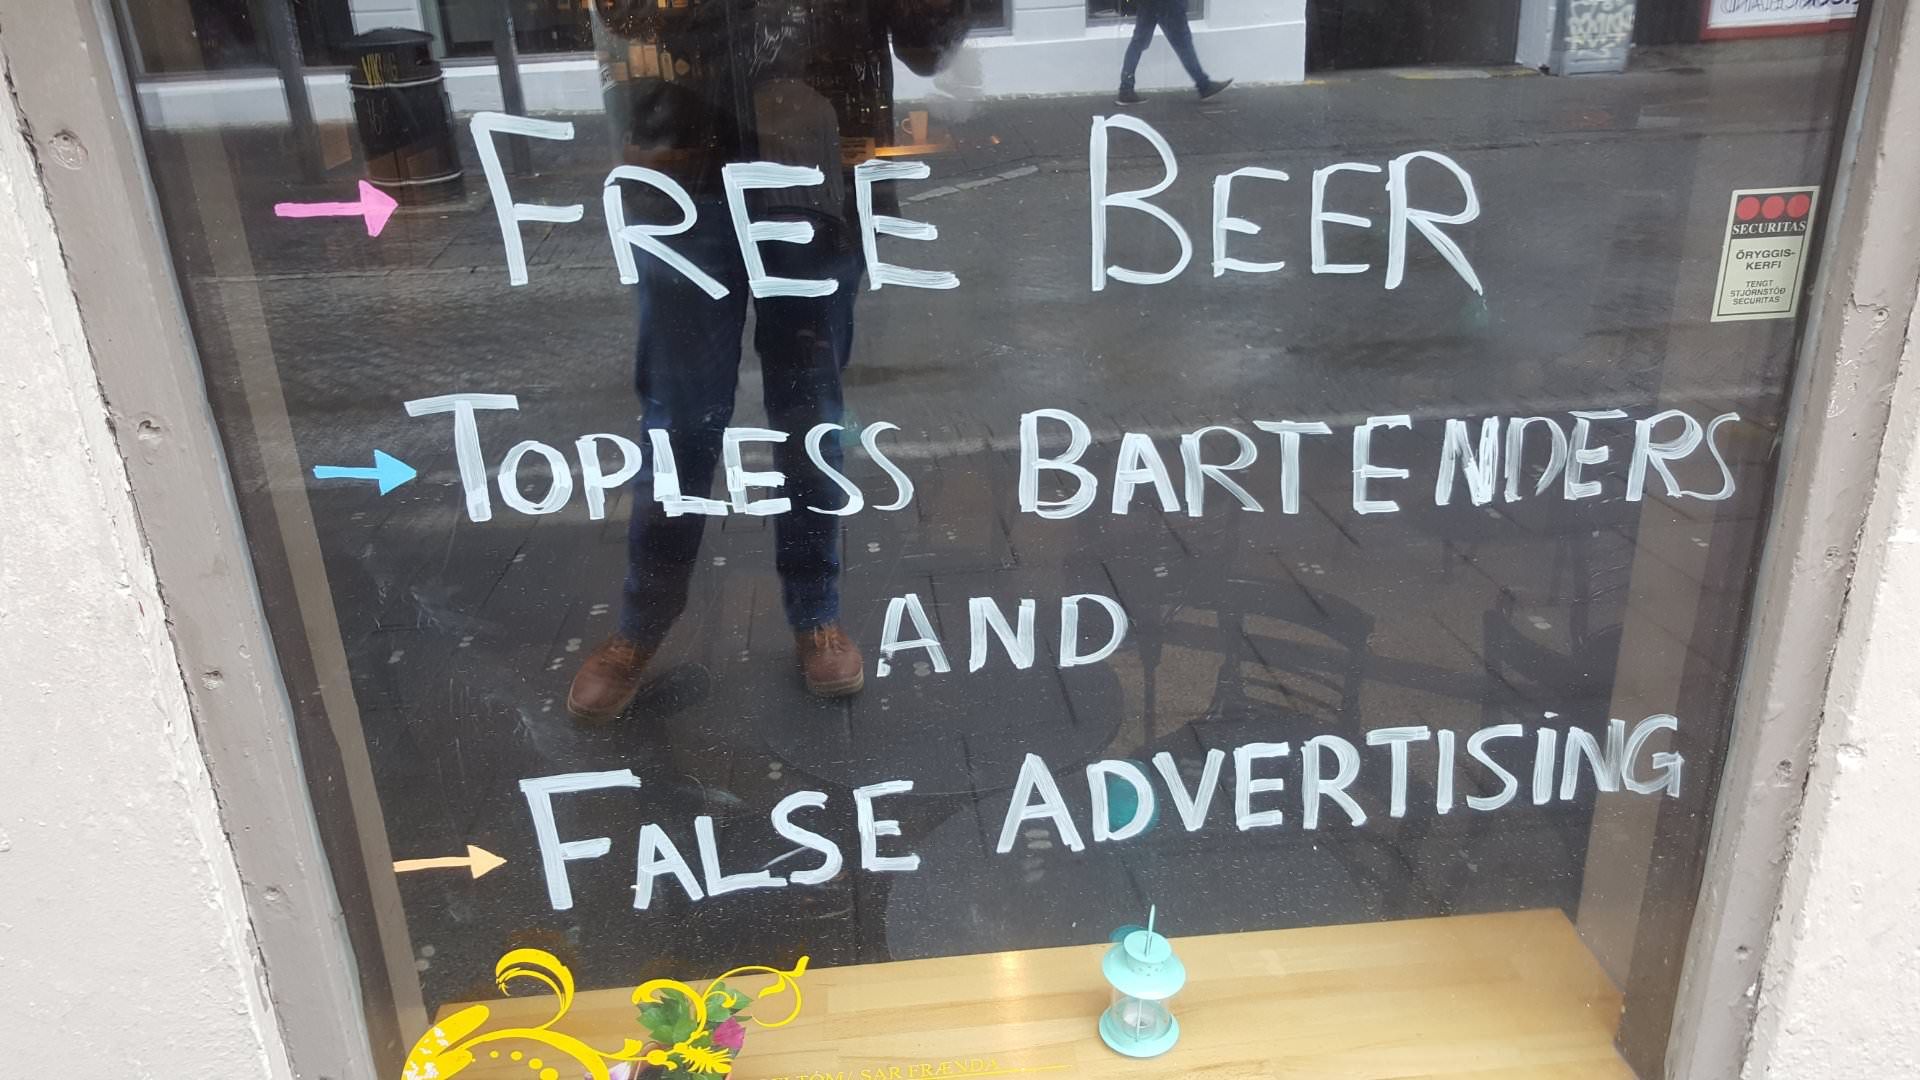 Saw this in the window of a bar in Iceland